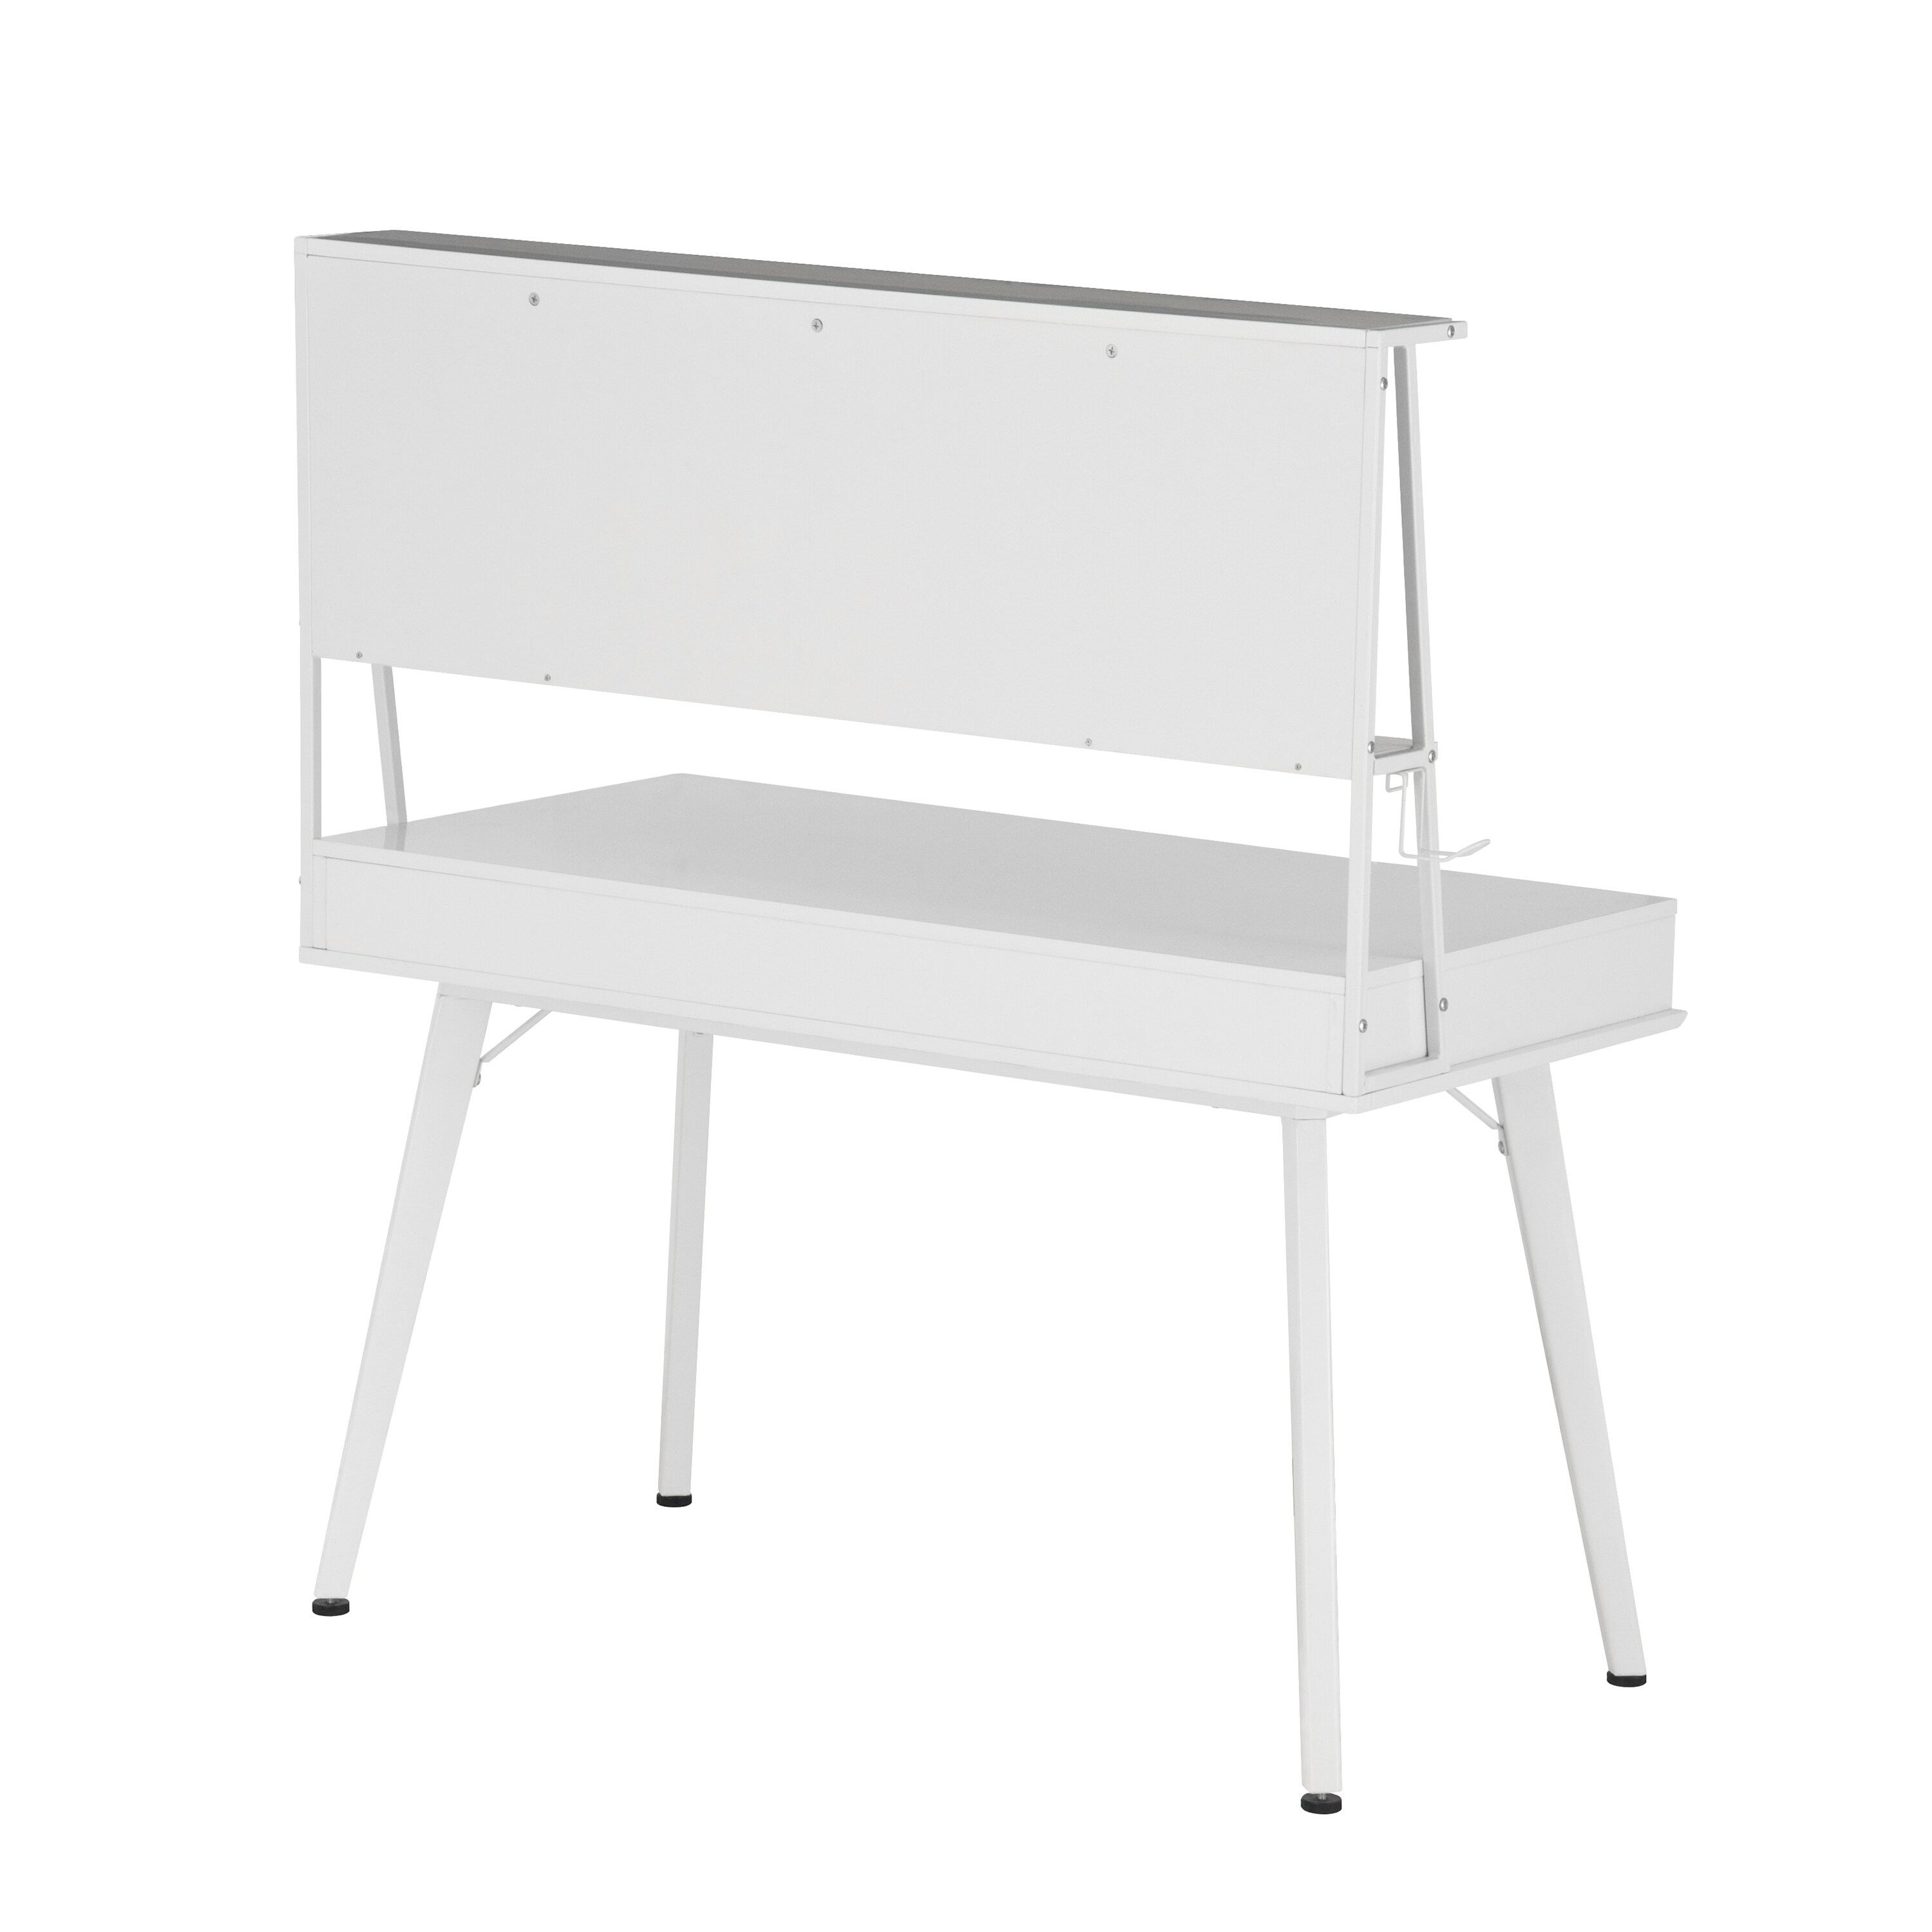 Study Computer Desk with Open Storage, One Pull Out Drawer & Magnetic Dry Erase White Board Home Office Desk, White